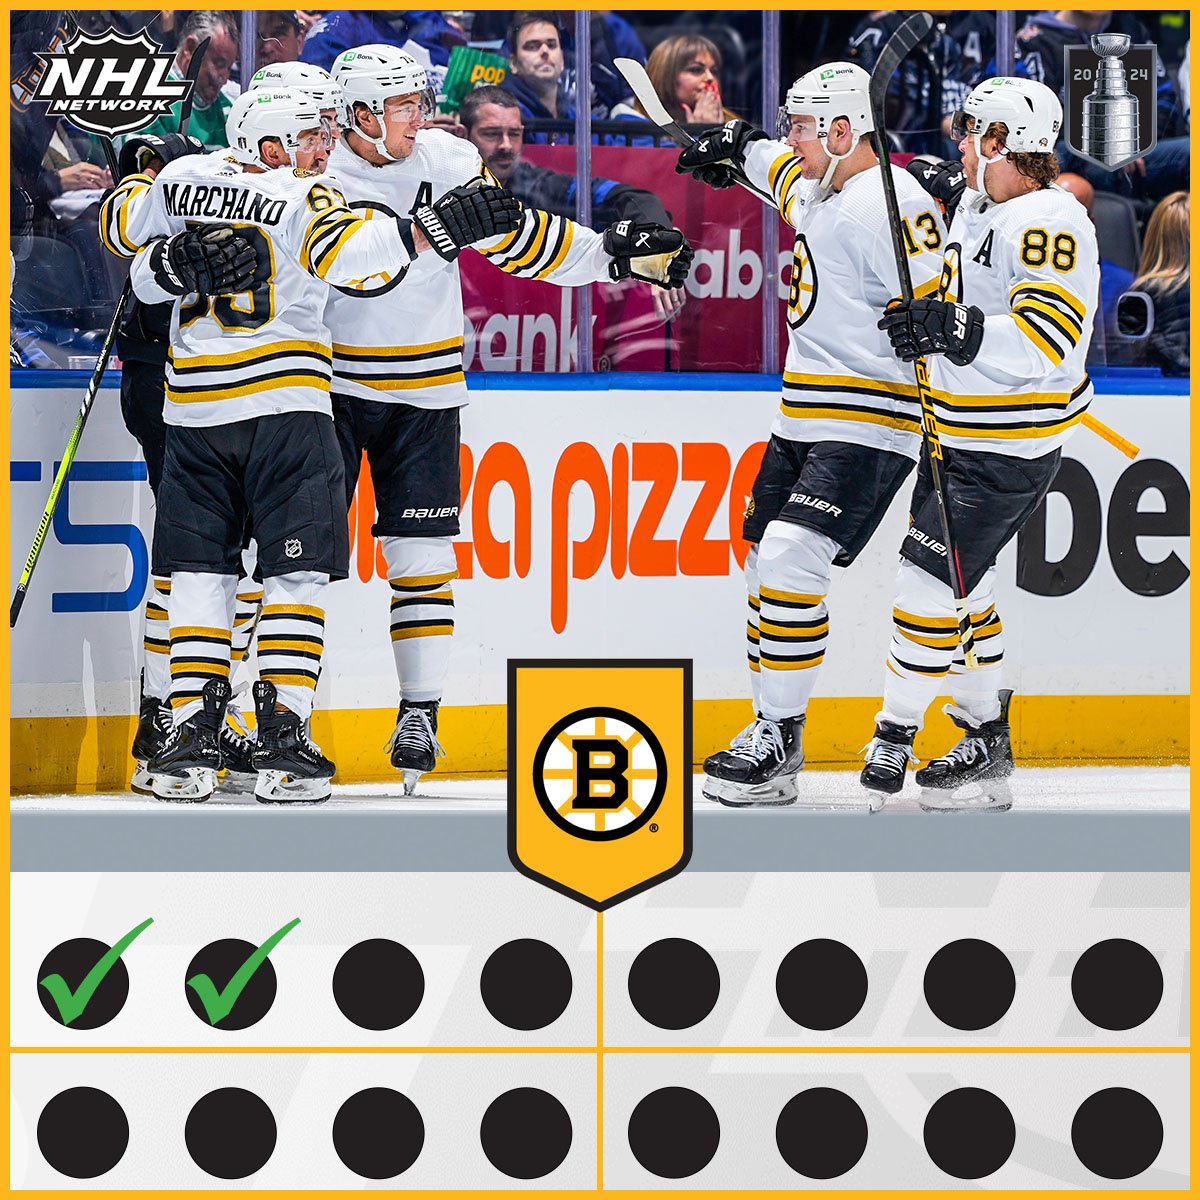 The @NHLBruins take Game 3 and retake the series lead! #NHLBruins | #StanleyCup